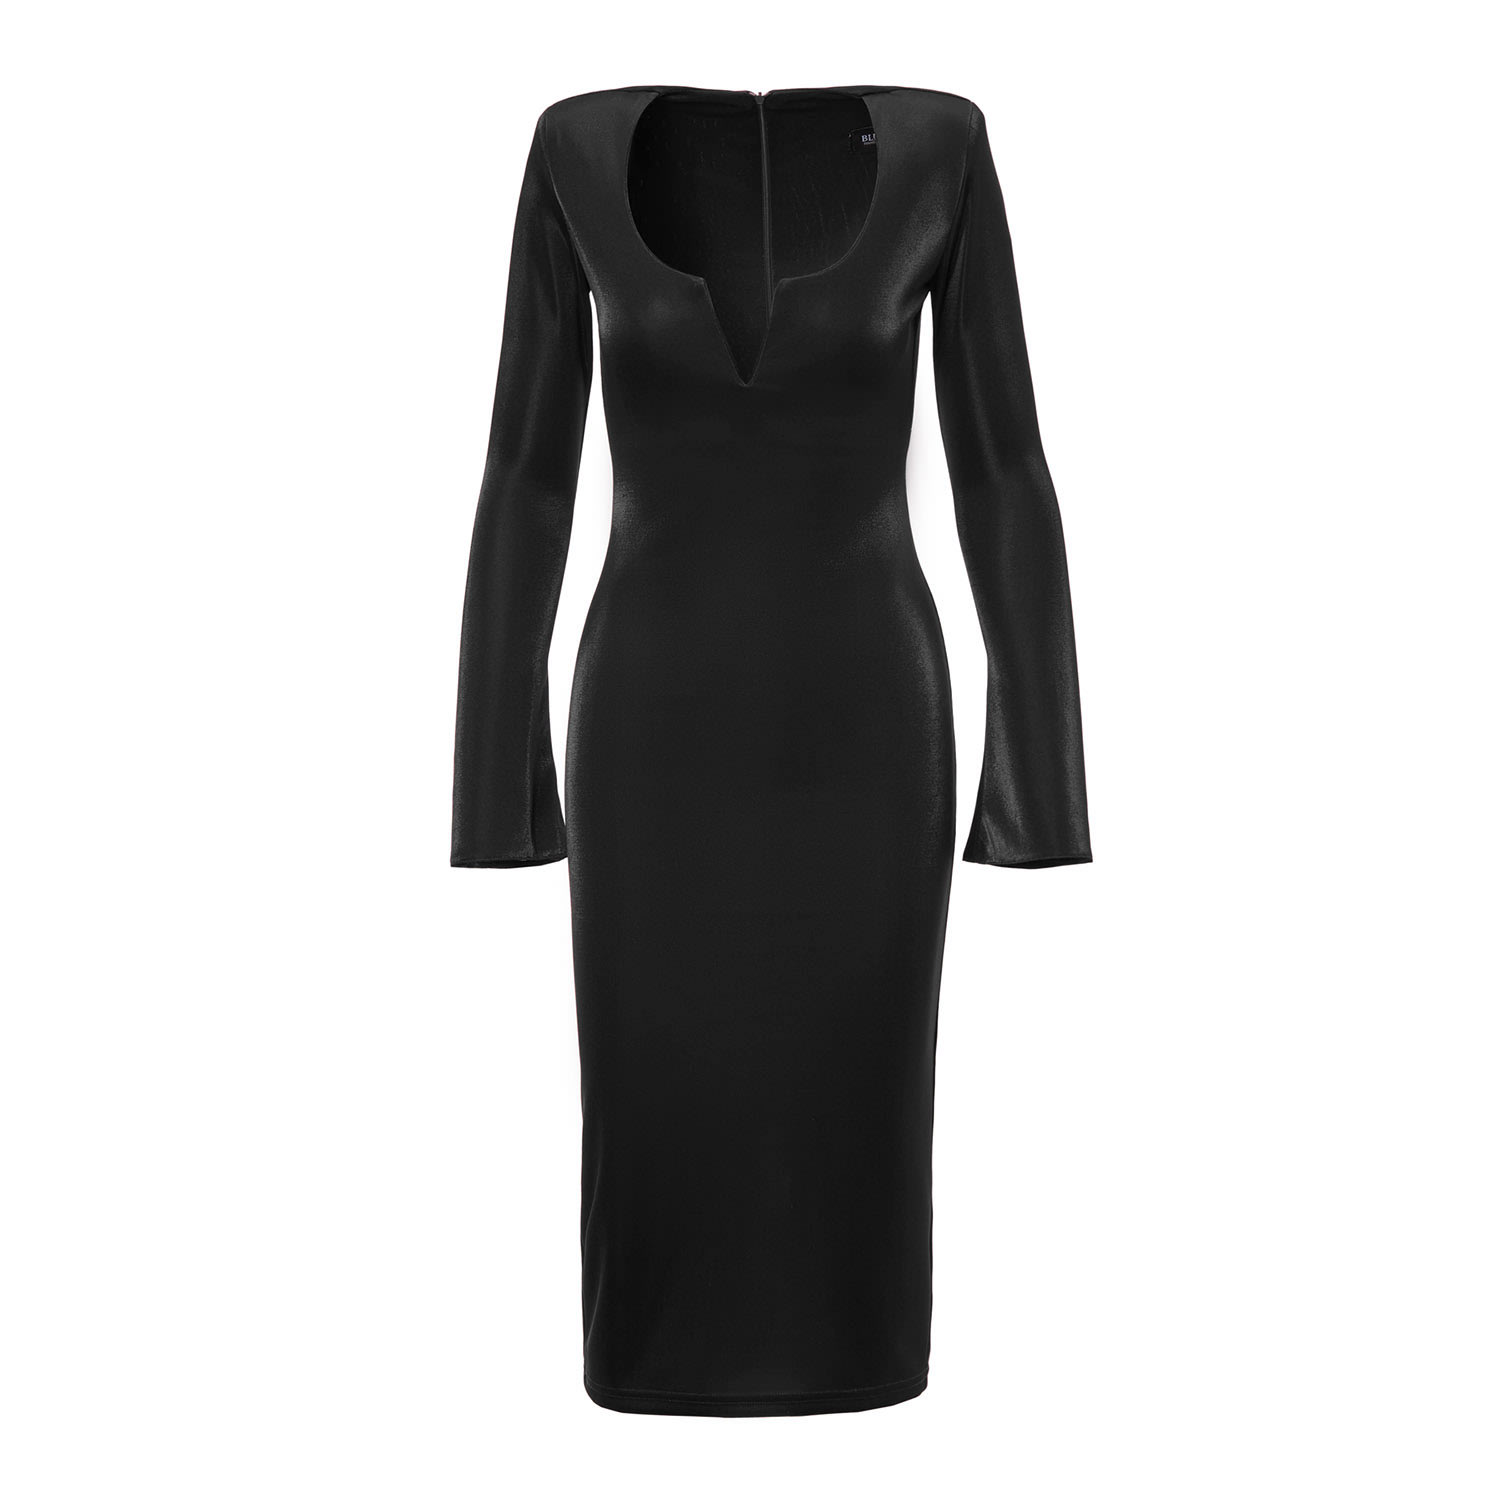 Women’s Black Bodycon Midi Dress With V-Neck Detail And Structured Shoulders Medium Bluzat